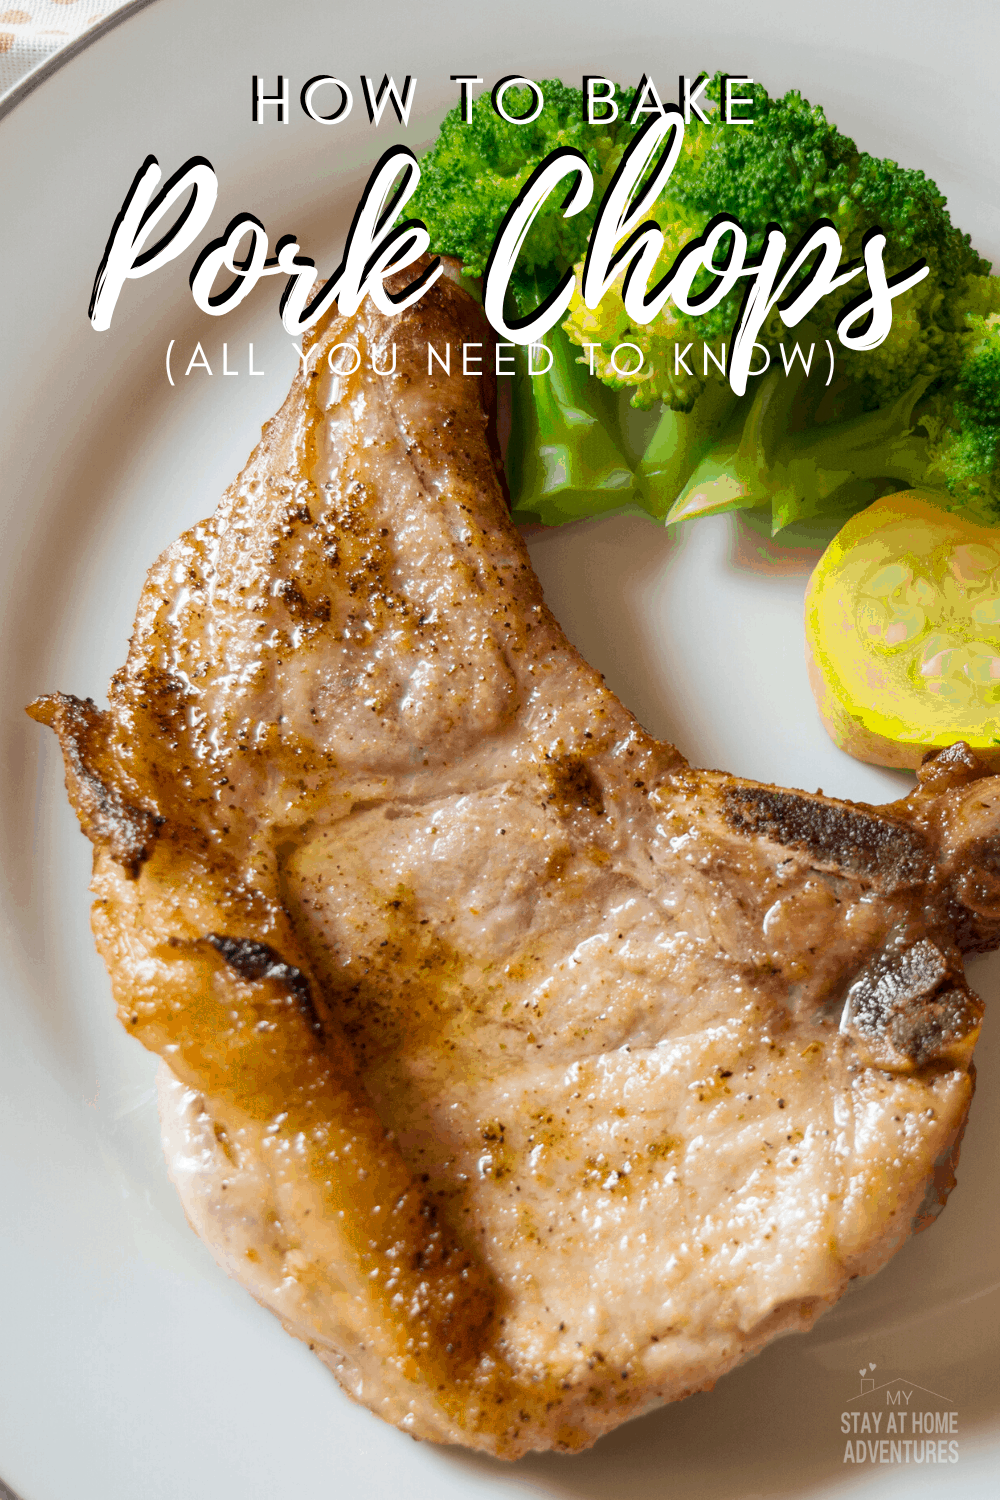 How to bake pork chops or how to cook pork chops in the oven is something that many new cooks wonder. Learn how to bake delicious juicy pork chops today. via @mystayathome